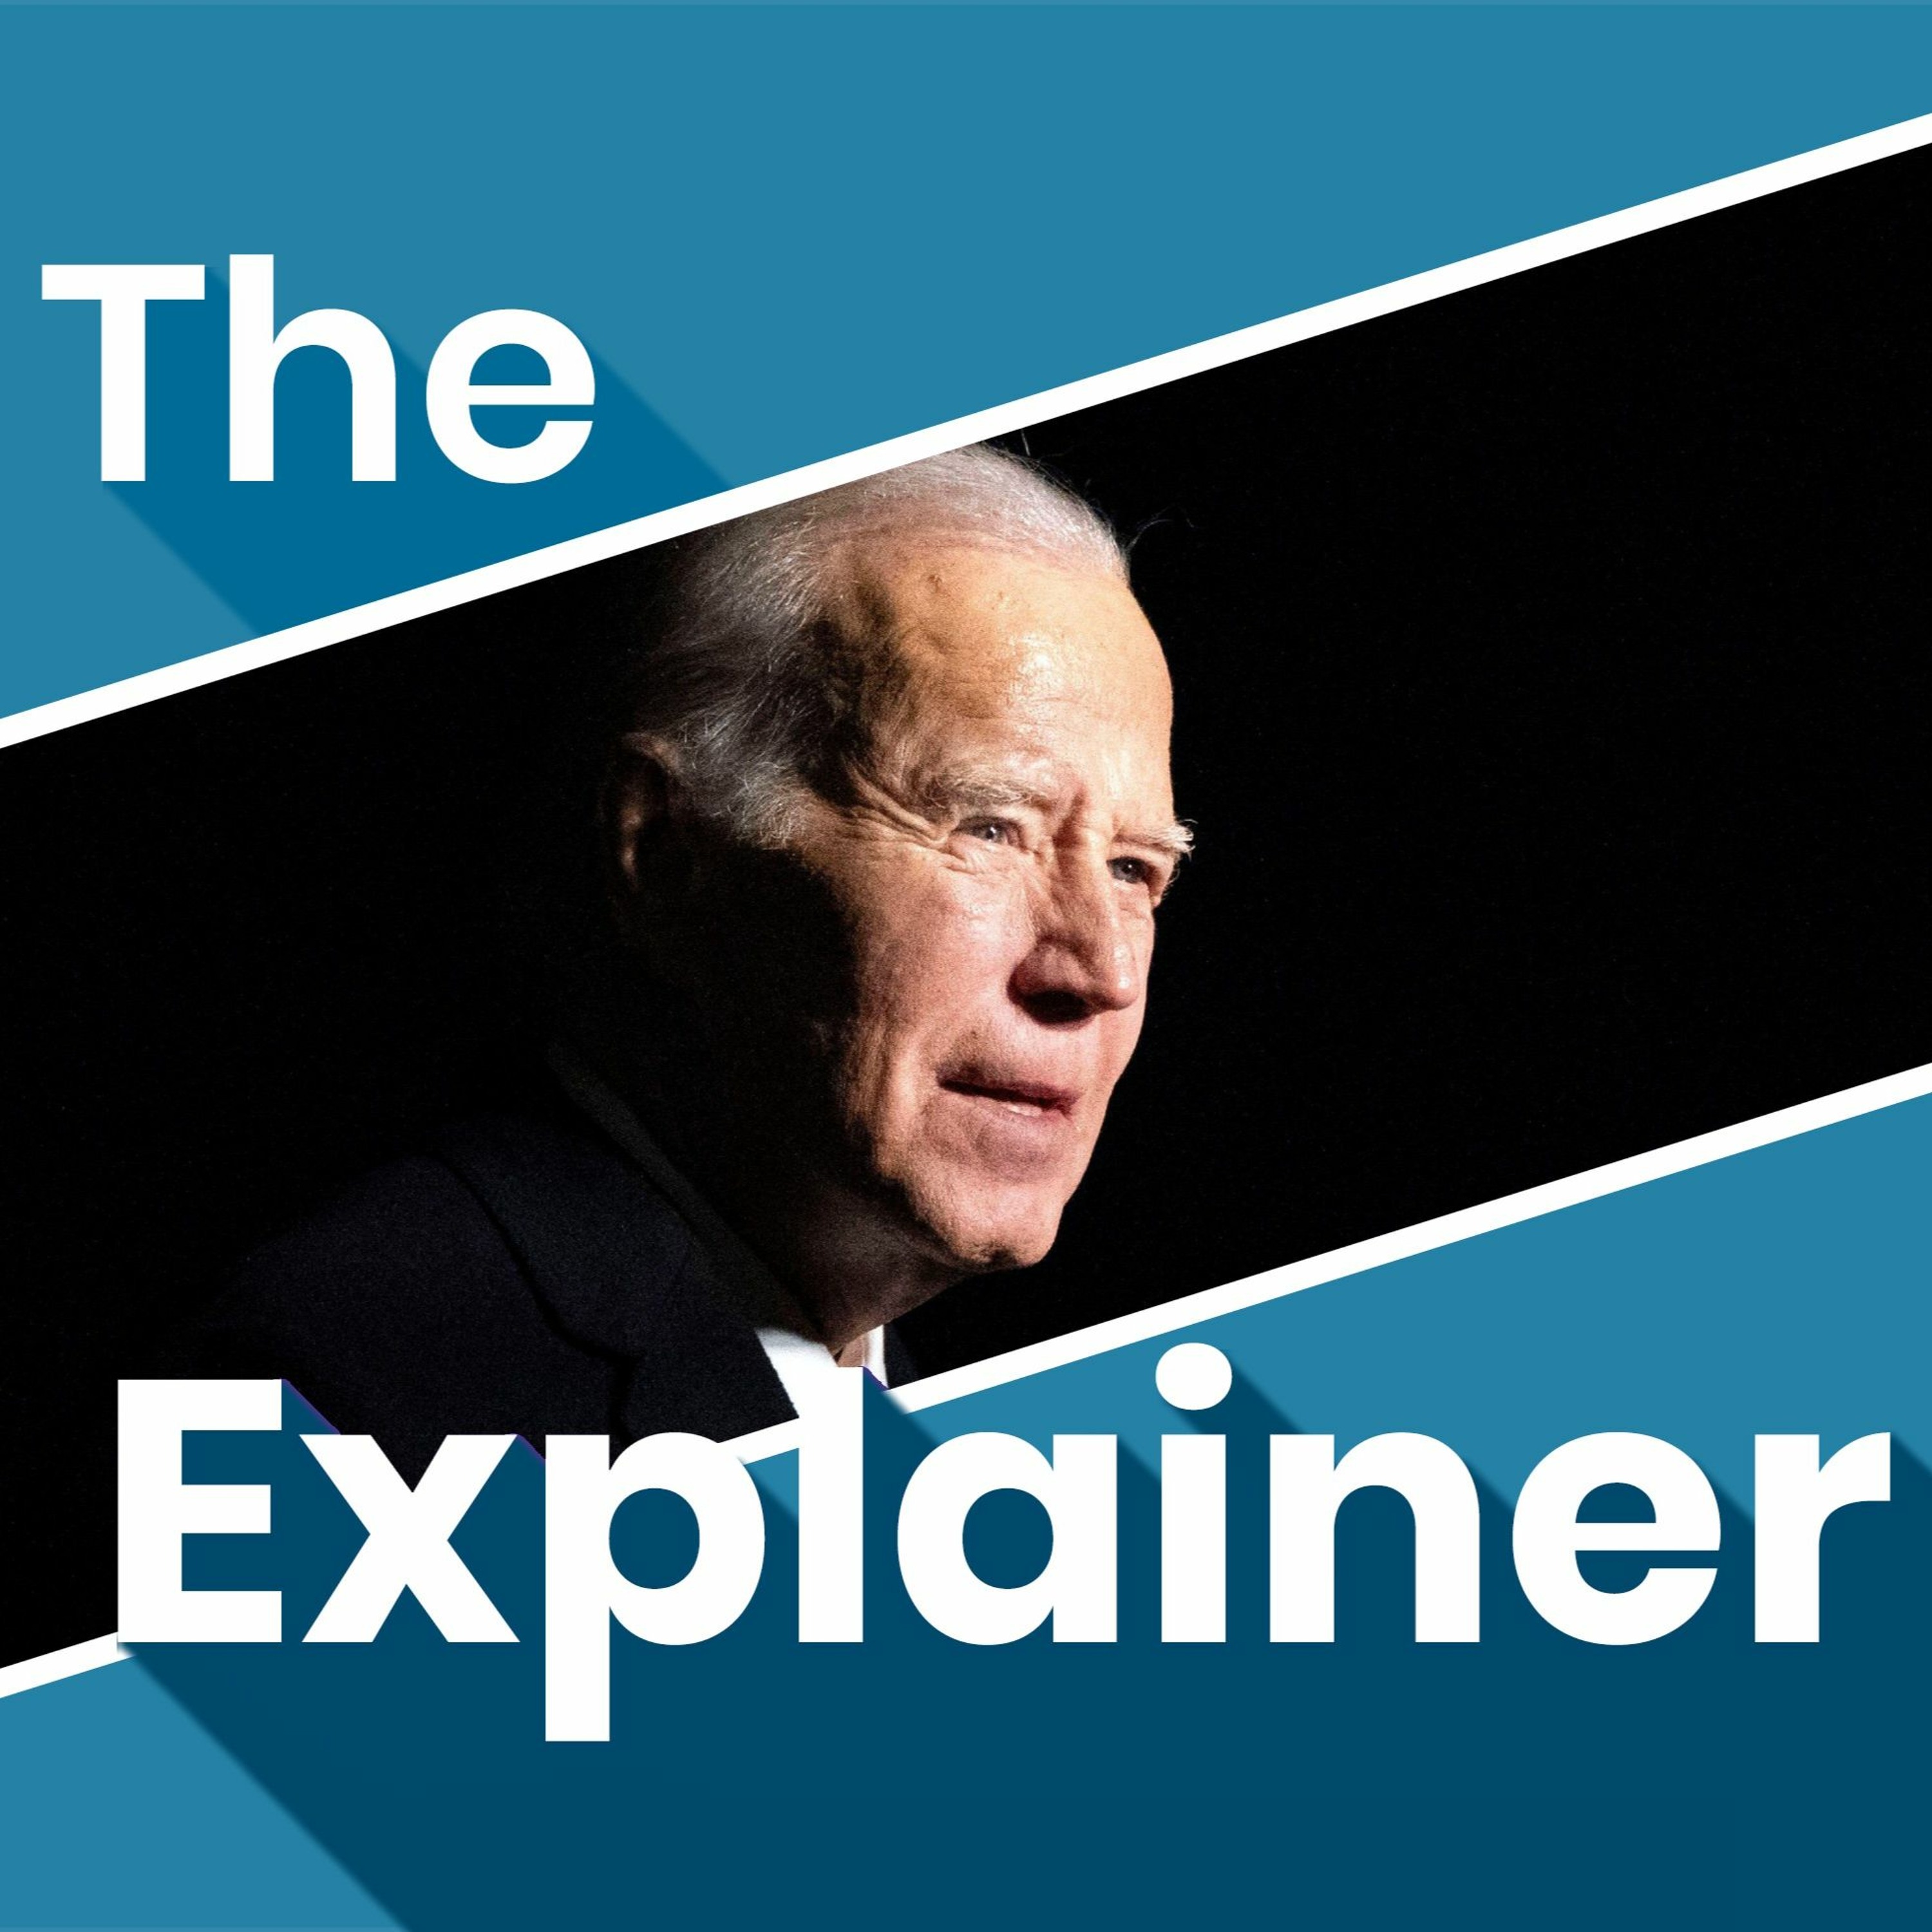 What are the big issues facing Joe Biden as he aims for re-election?